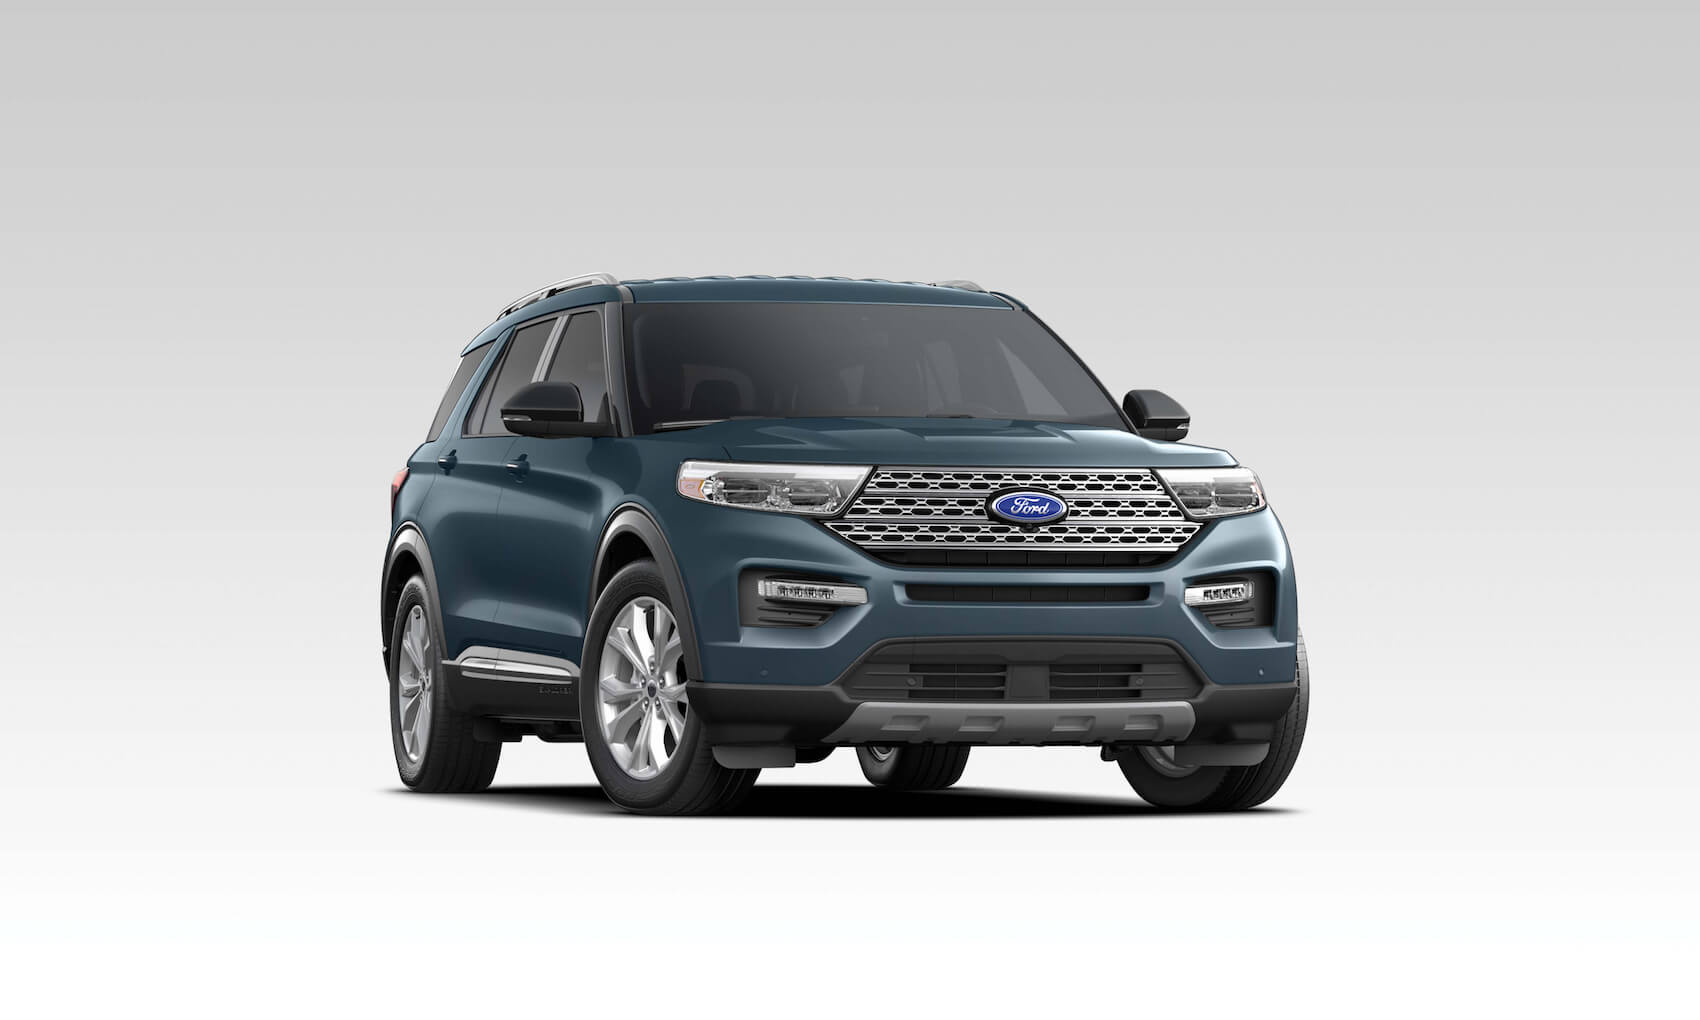 2021 Ford Explorer features